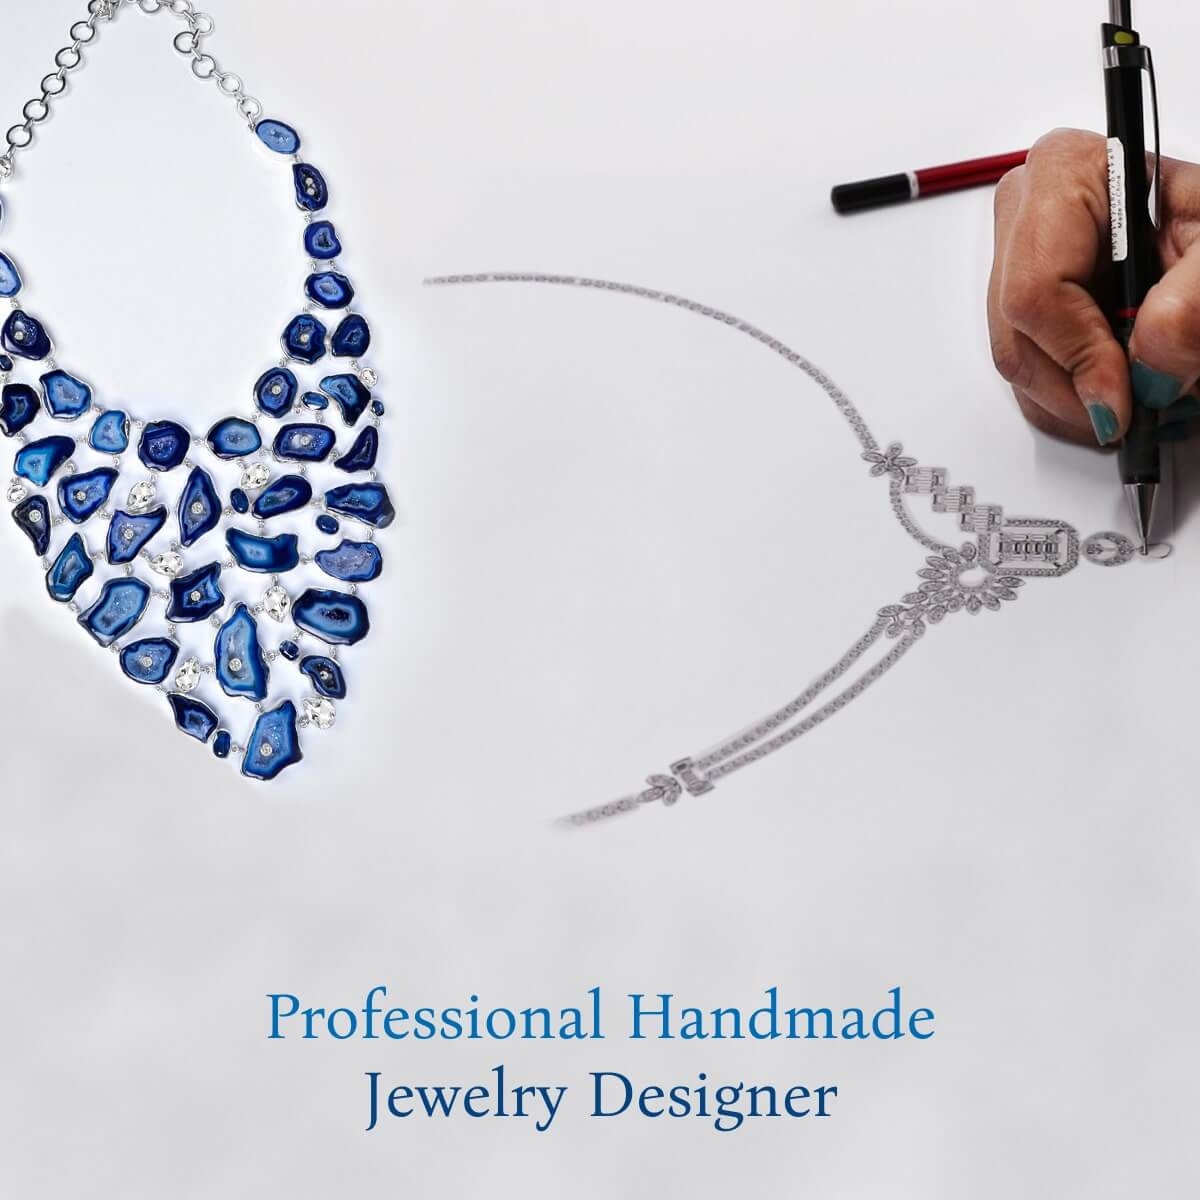 3D Modelling for Jewellery and Objects - SquarePeg Studios